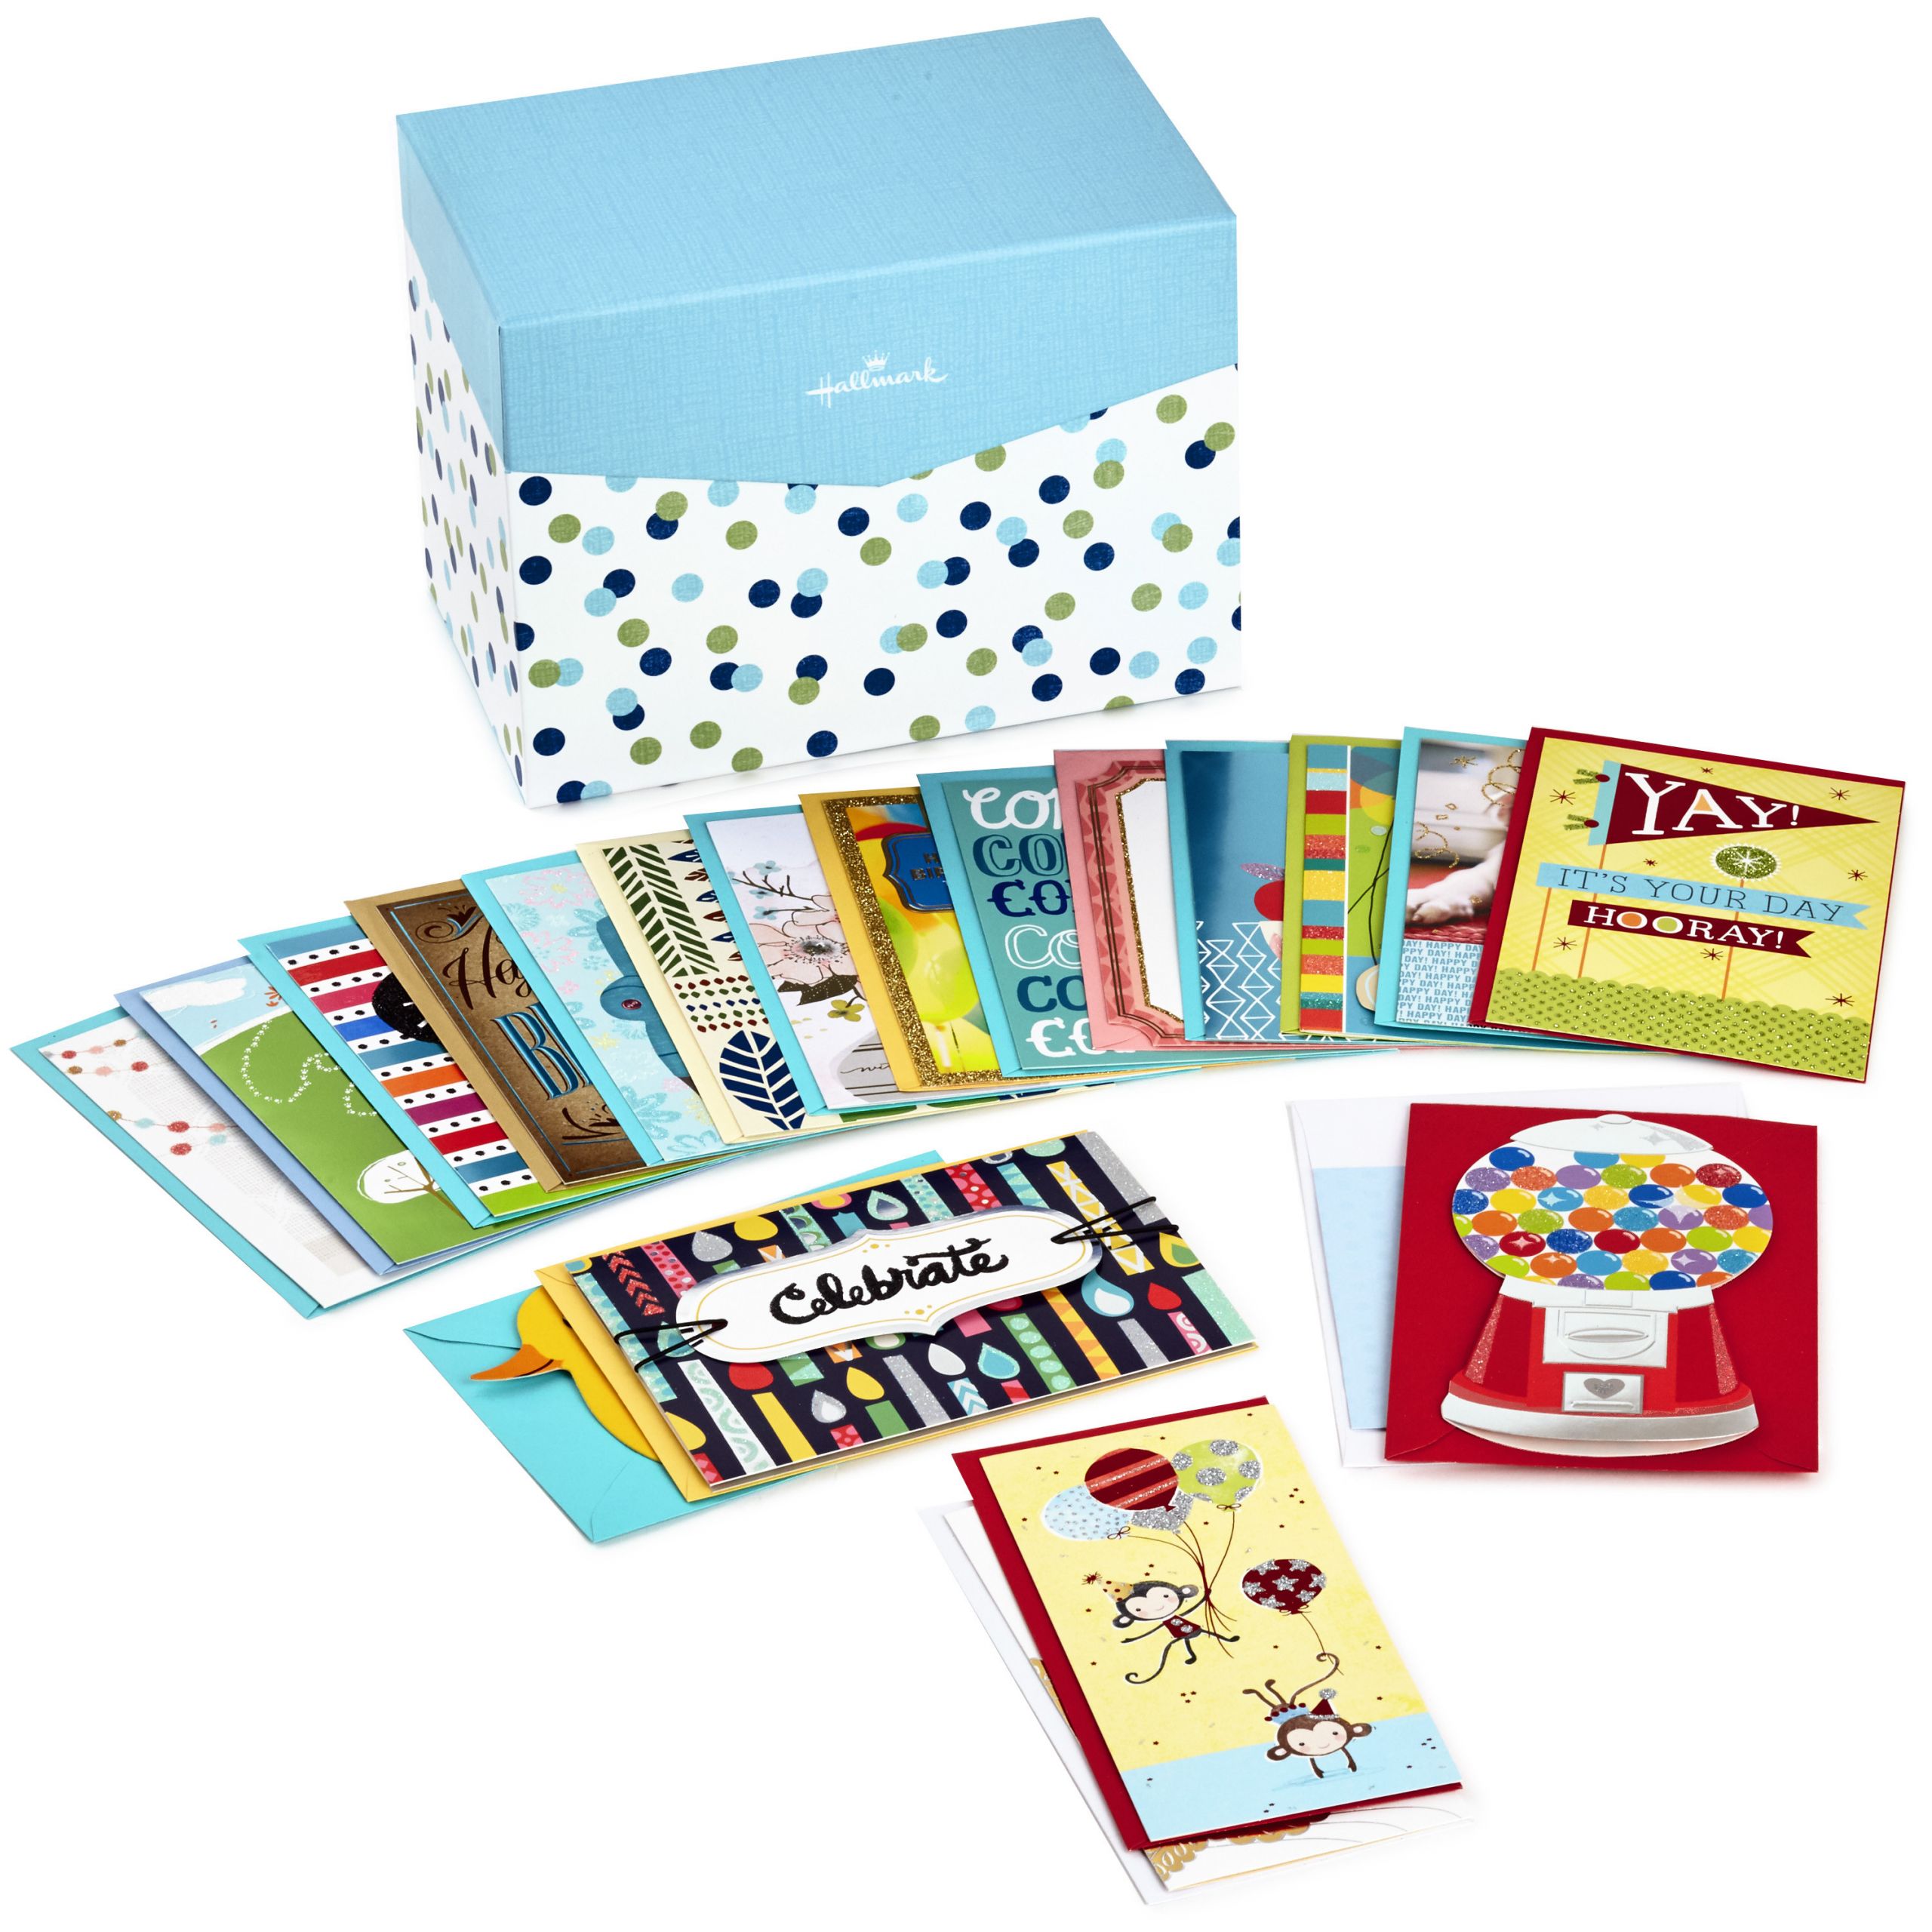 Boxed Birthday Cards
 Hallmark All Occasion Boxed Greeting Card Assortment 20